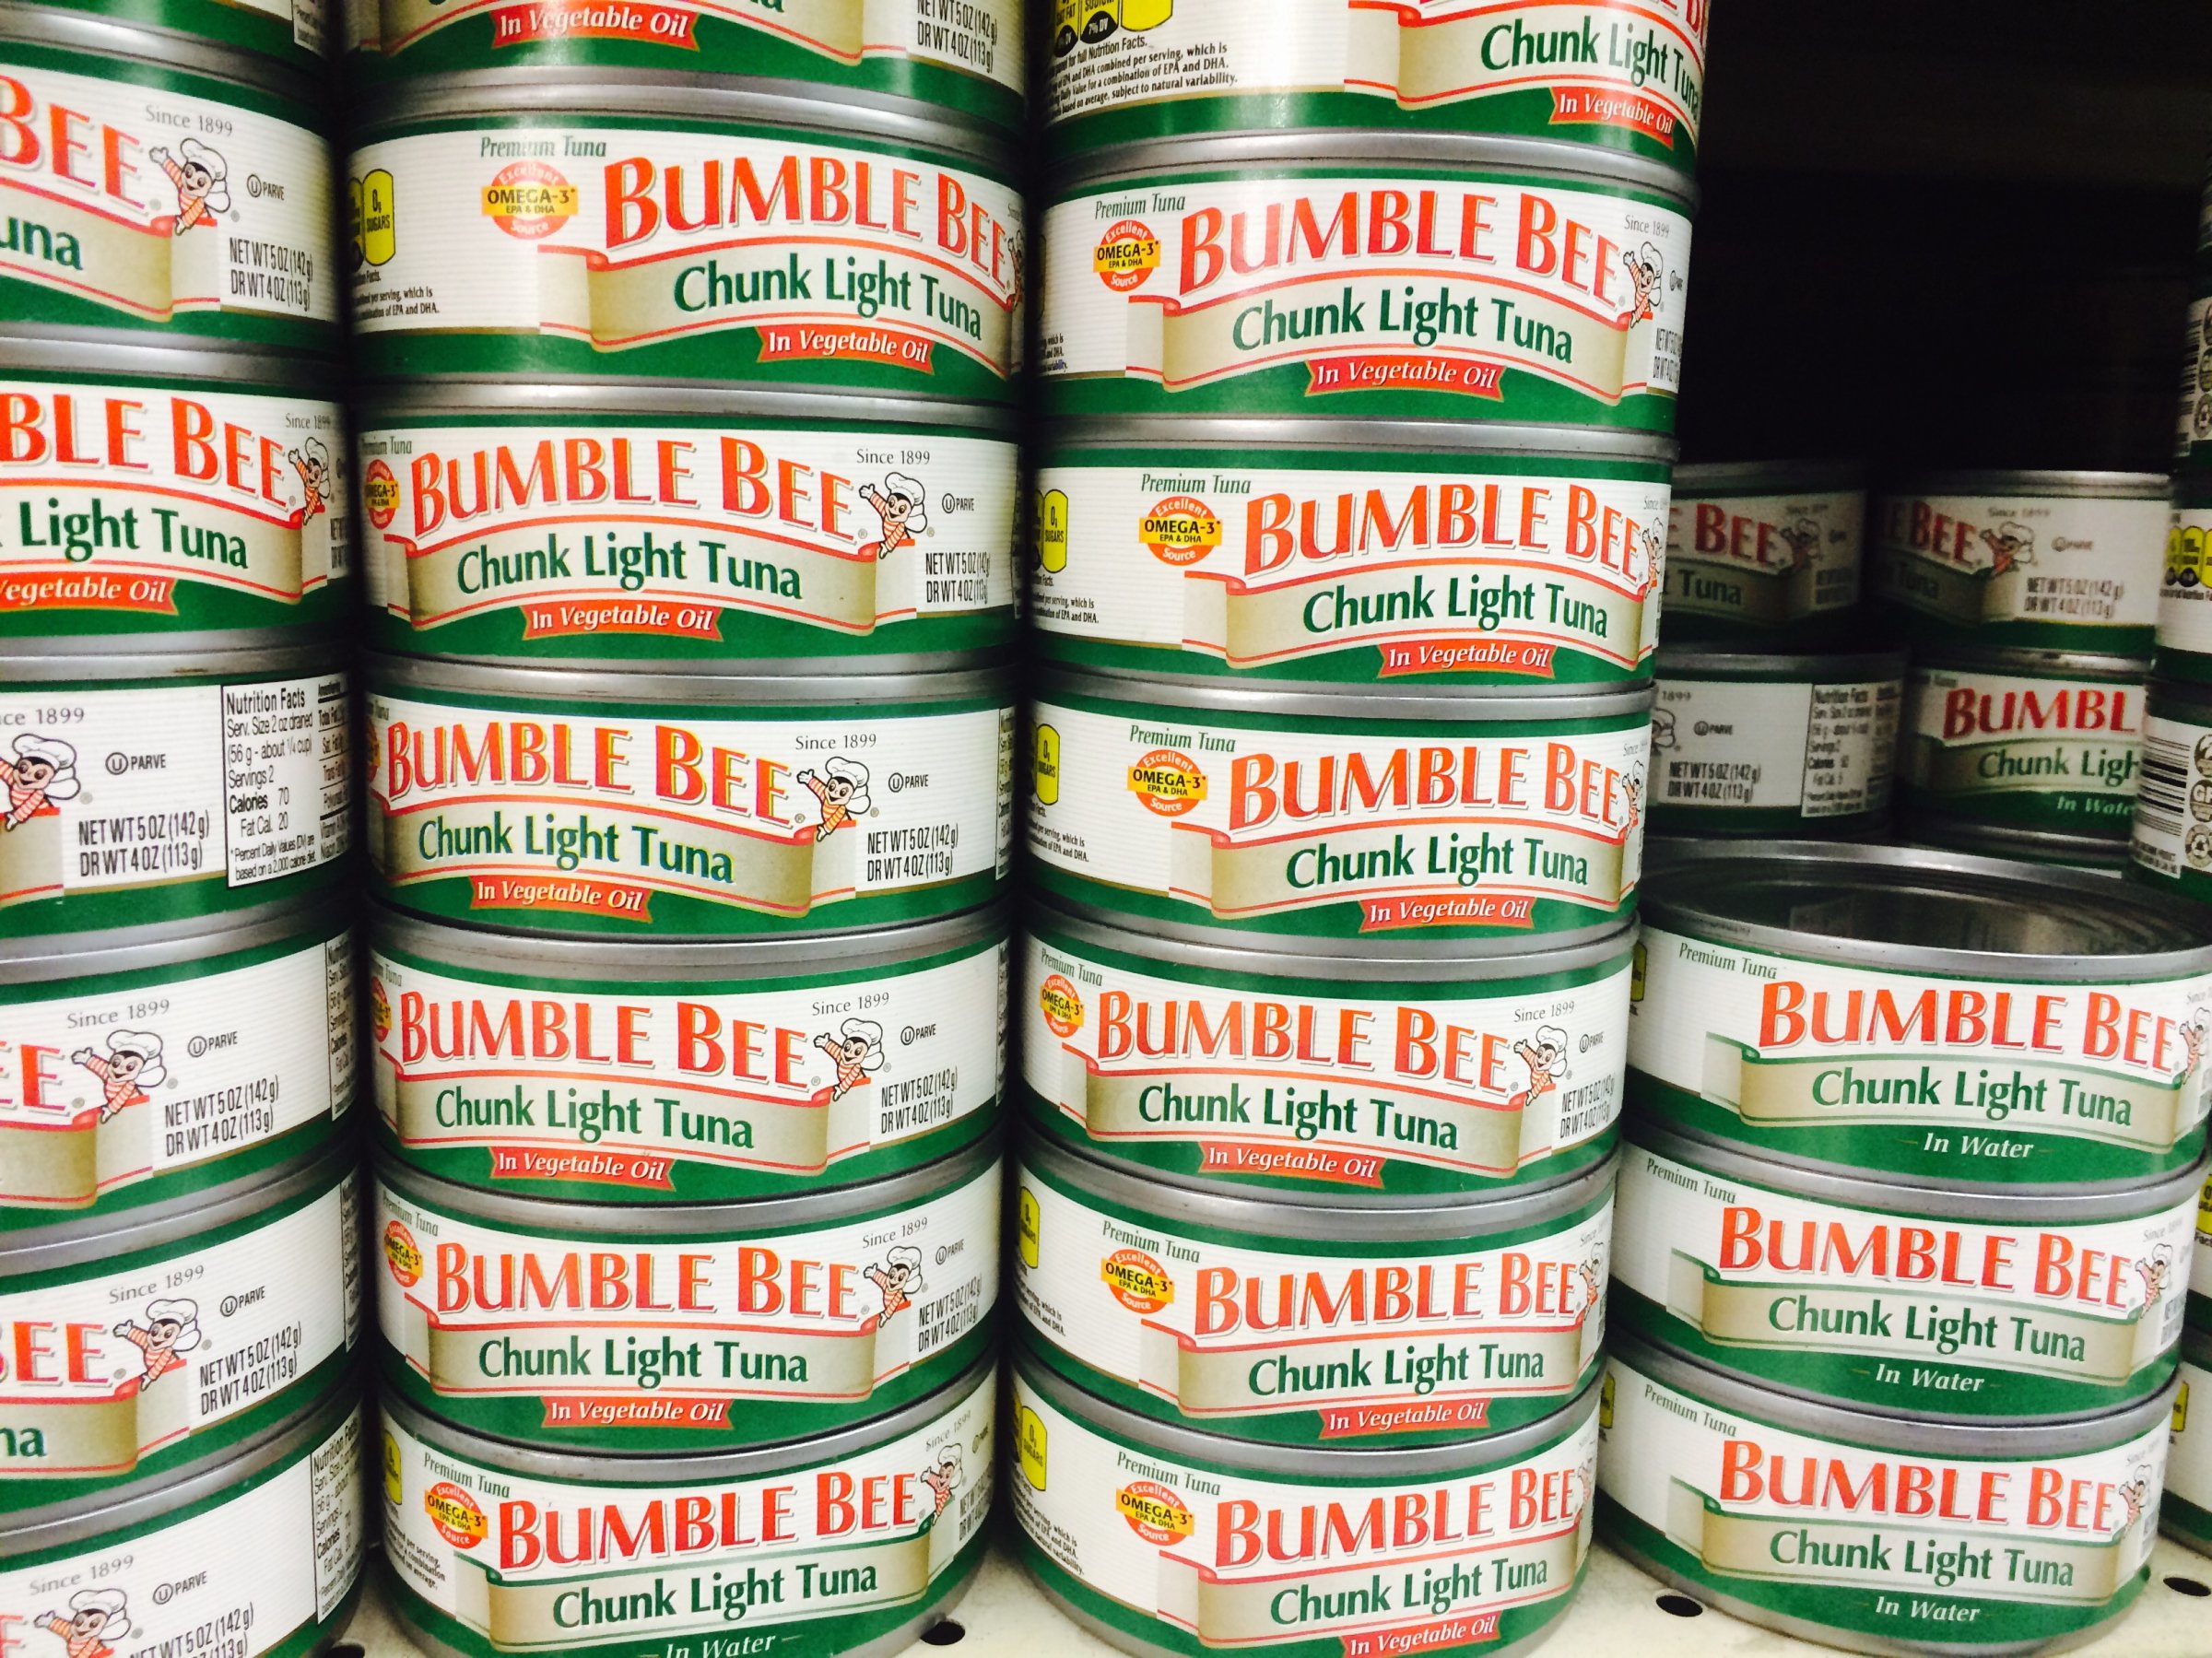 Bumble Bee chunk light tuna can is seen on a shelf at a grocery store.